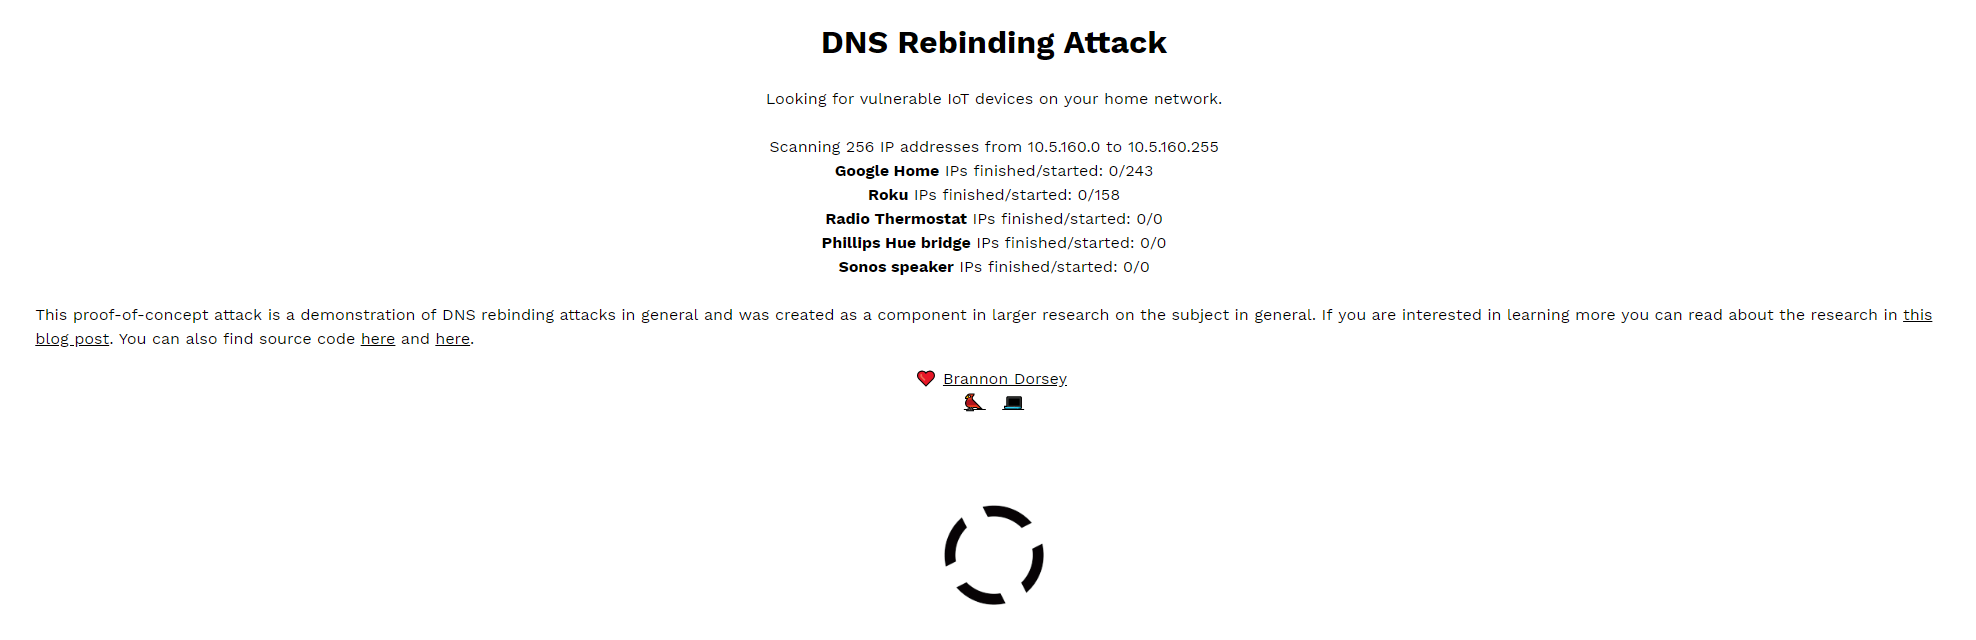 Prevent DNS Rebinding Attacks By Adjusting Your Router